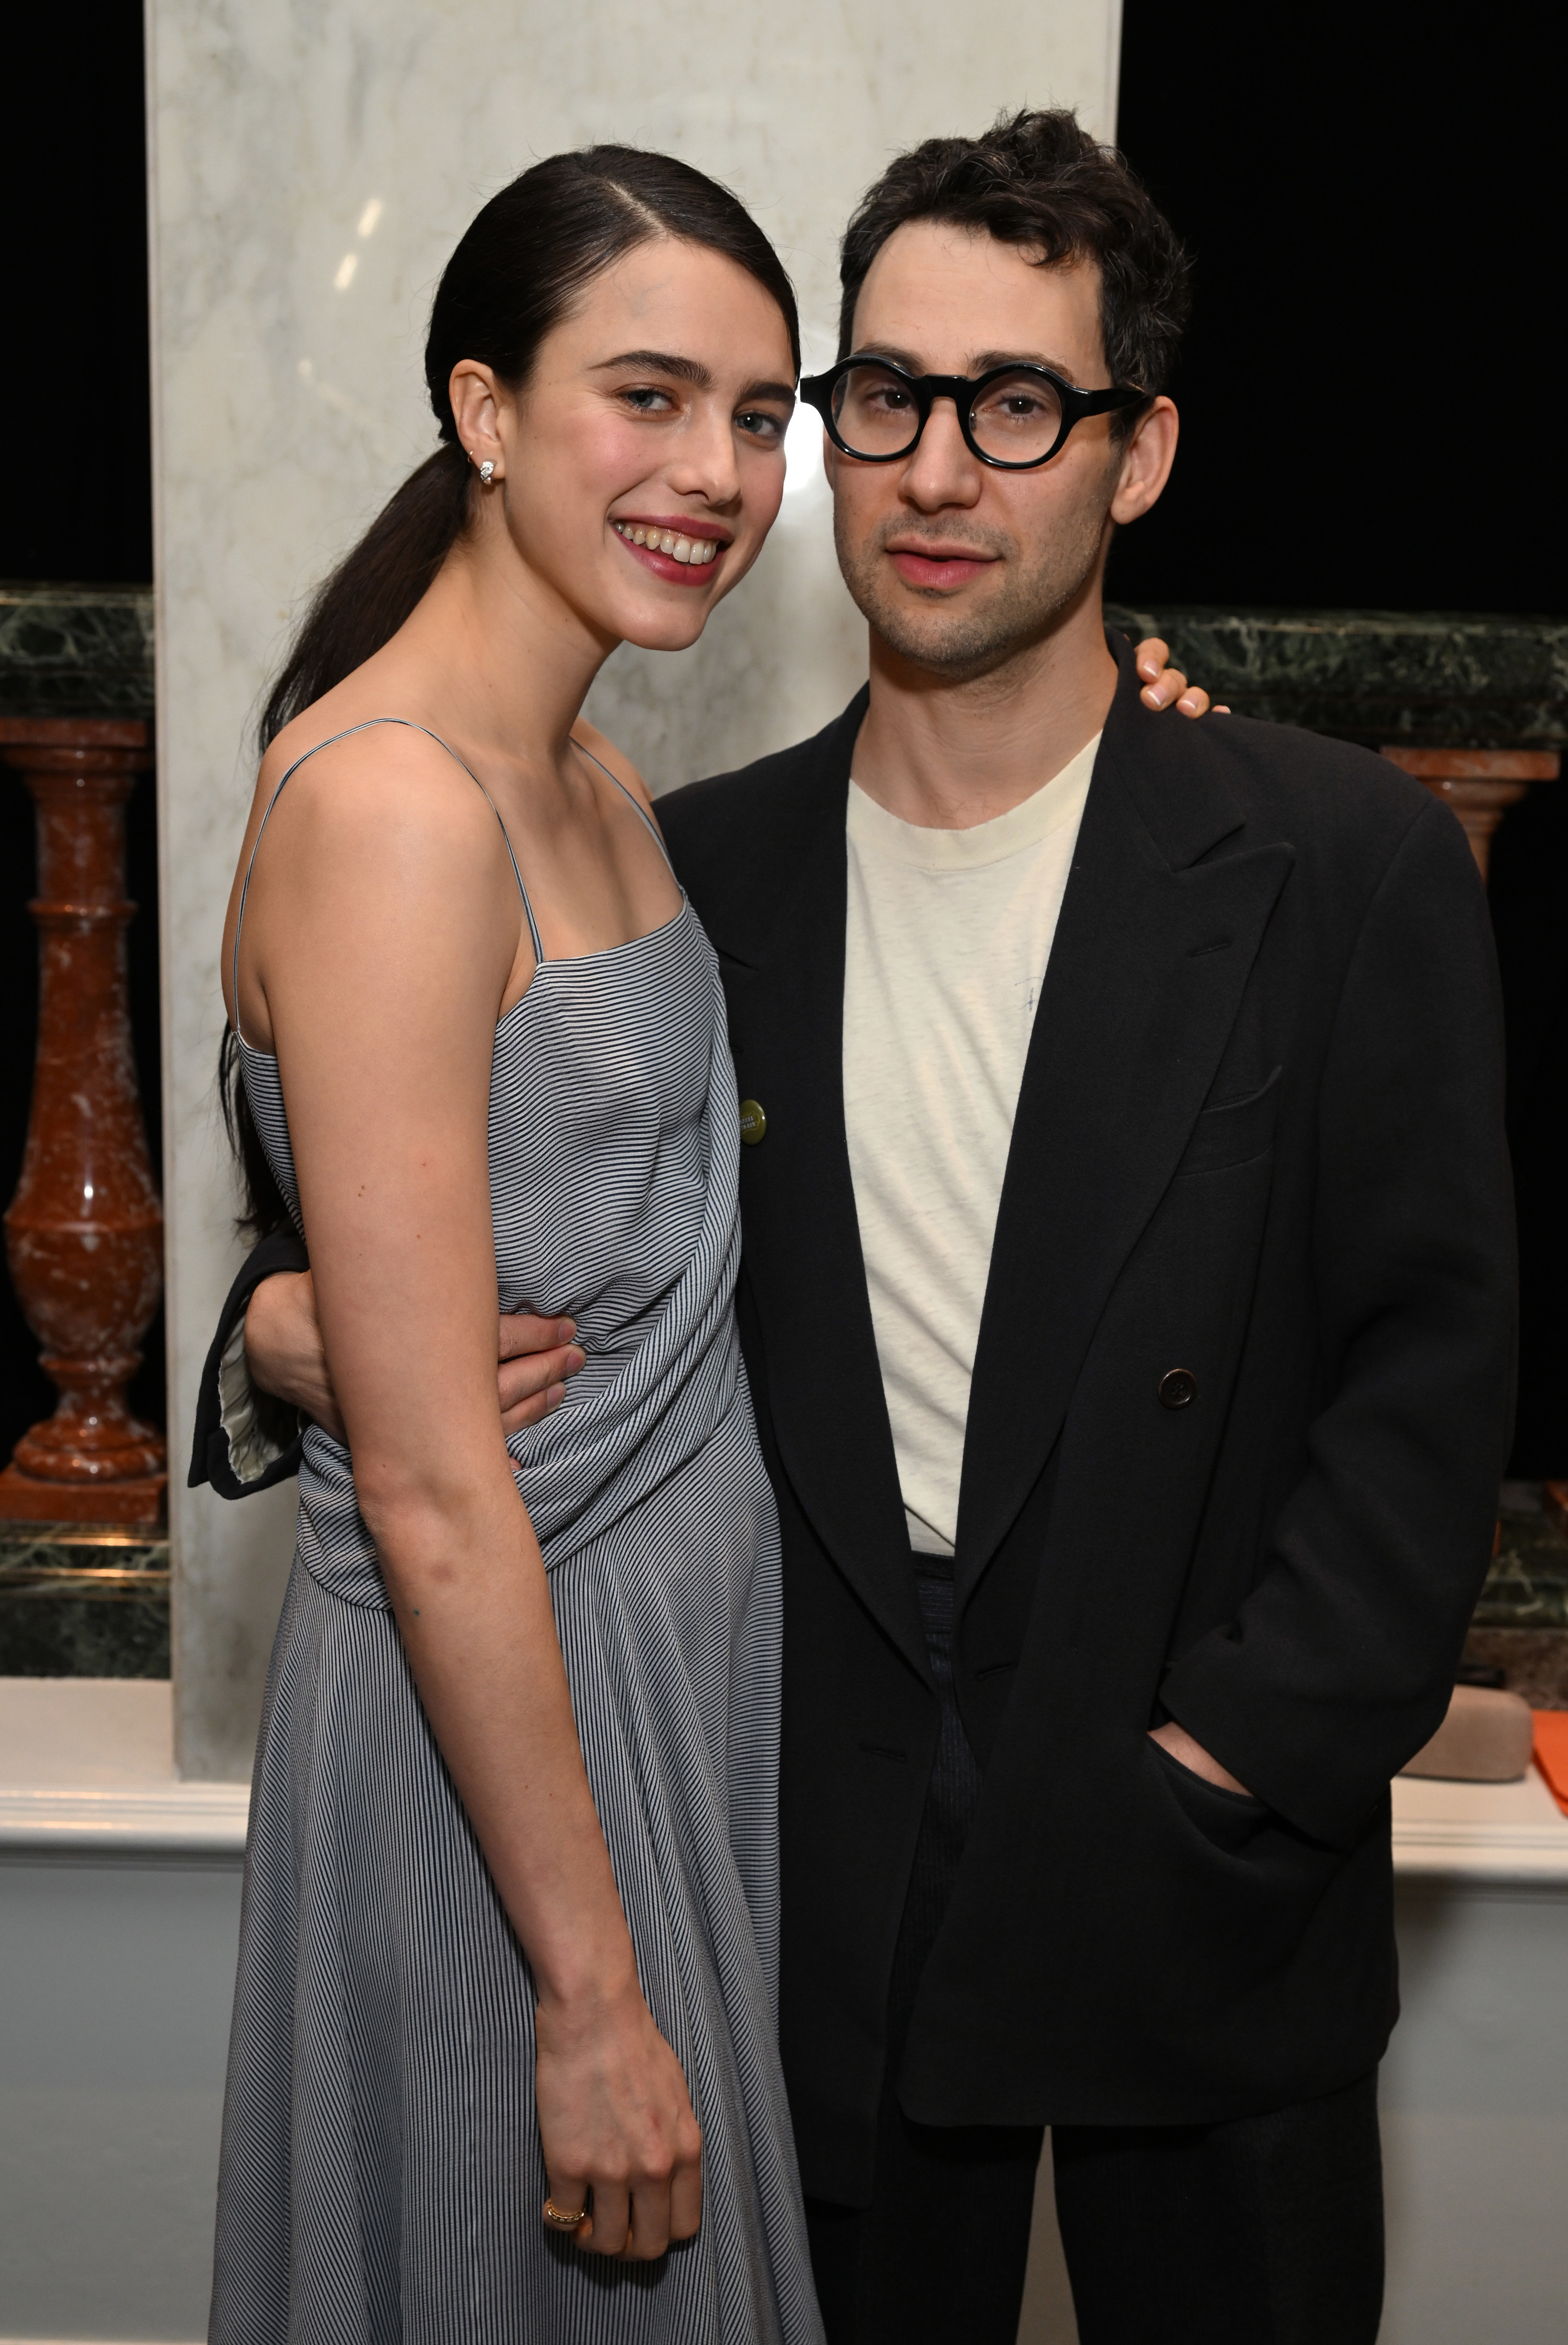 Margaret Qualley and Jack Antonoff smiling with their arms around each other